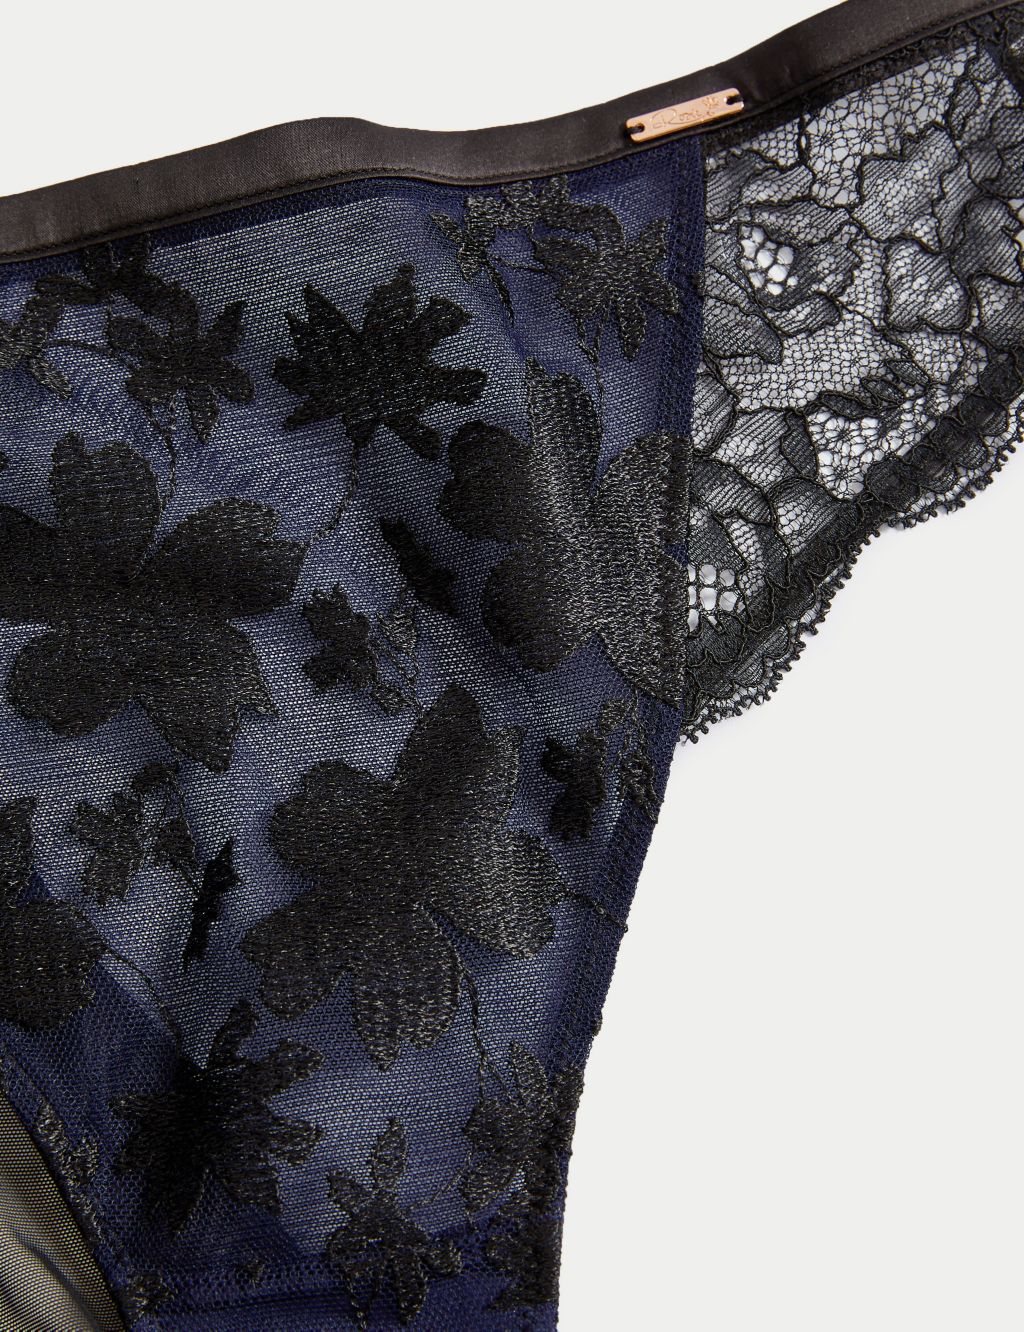 Cosmos Embroidery High Leg Knickers image 6